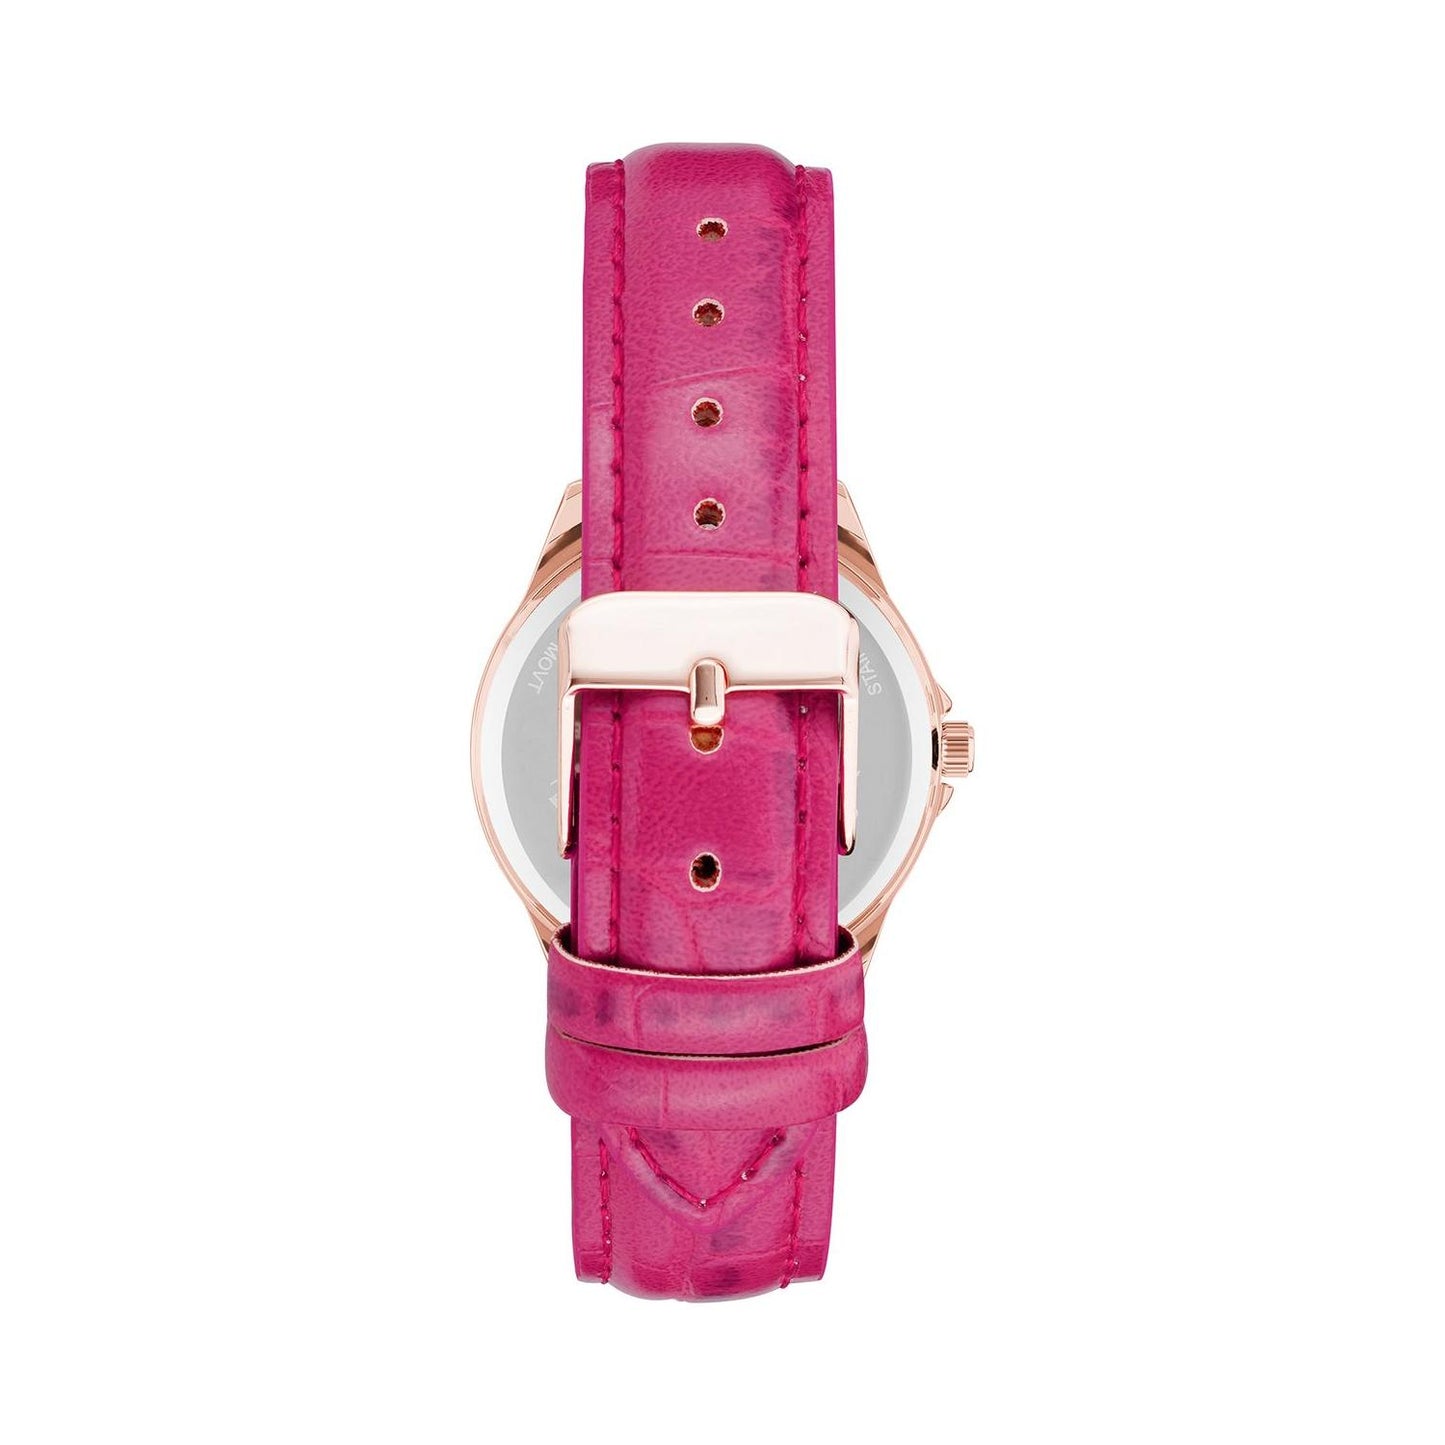 JUICY COUTURE JUICY COUTURE MOD. JC_1220RGPK WATCHES juicy-couture-mod-jc_1220rgpk